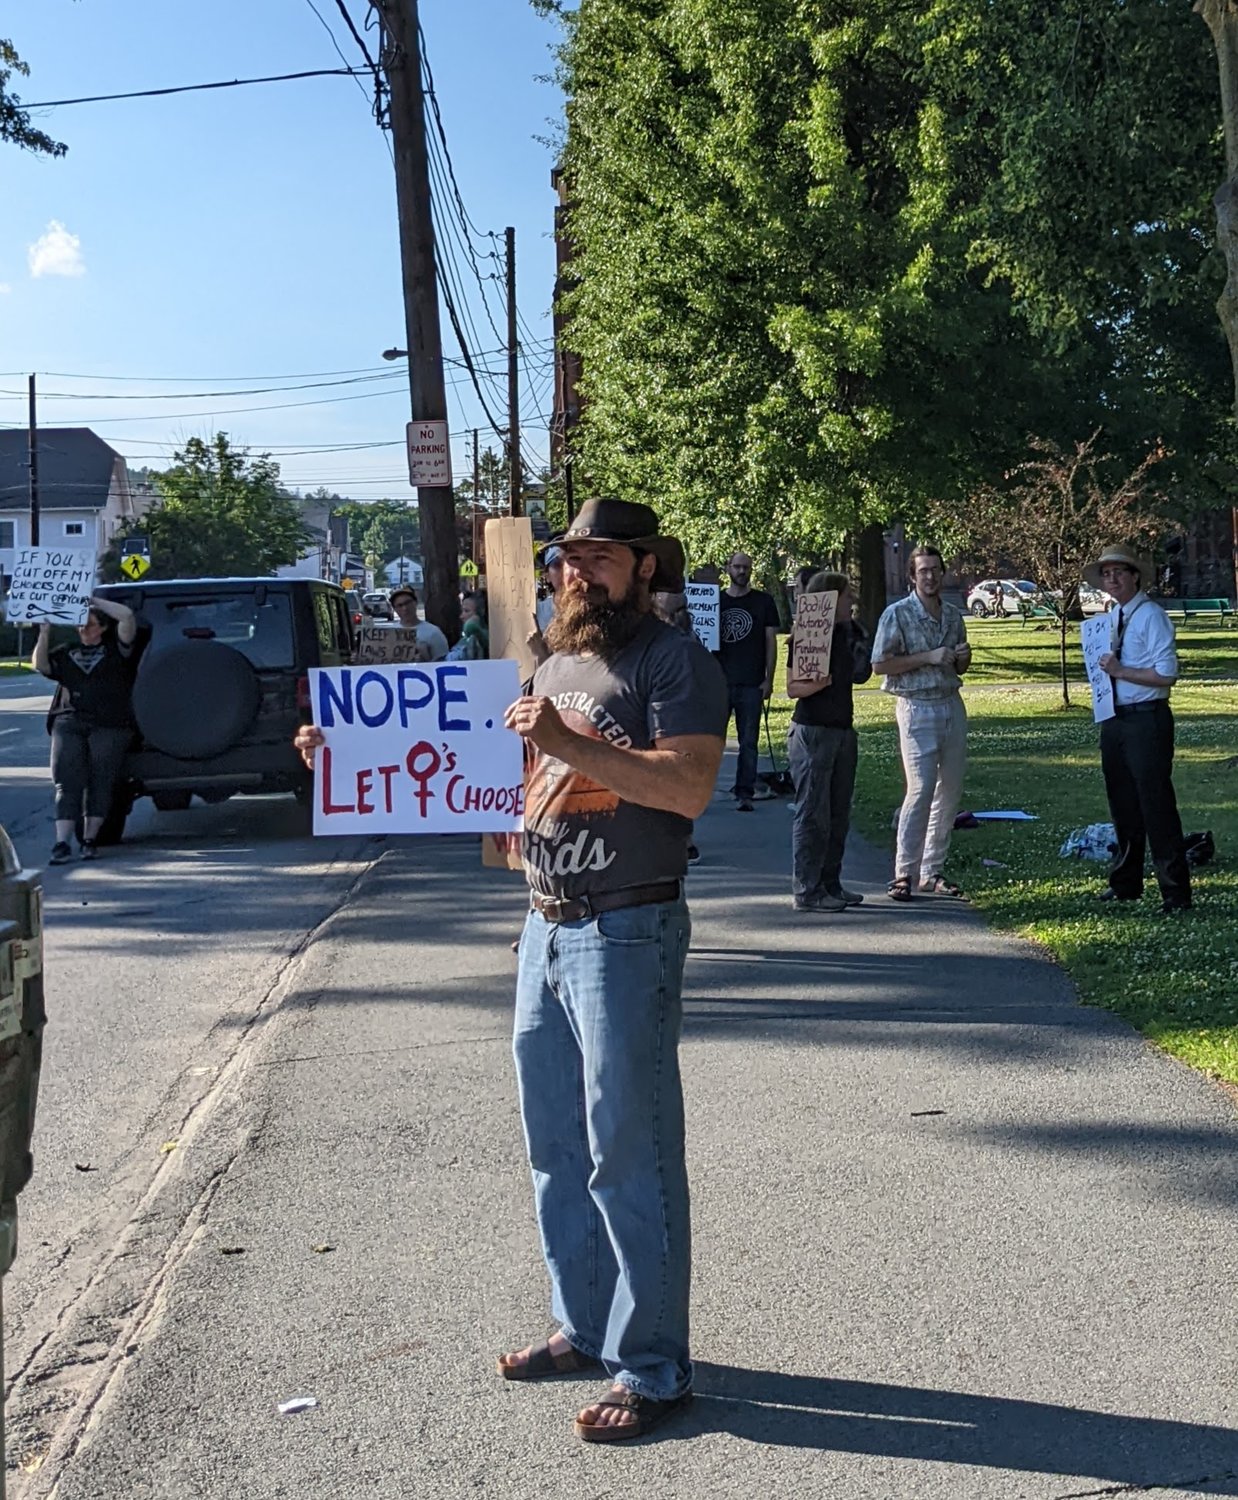 Over 50 people attended a Friday evening protest at Honesdale's Central Park. Families with young children to those in their 80s.